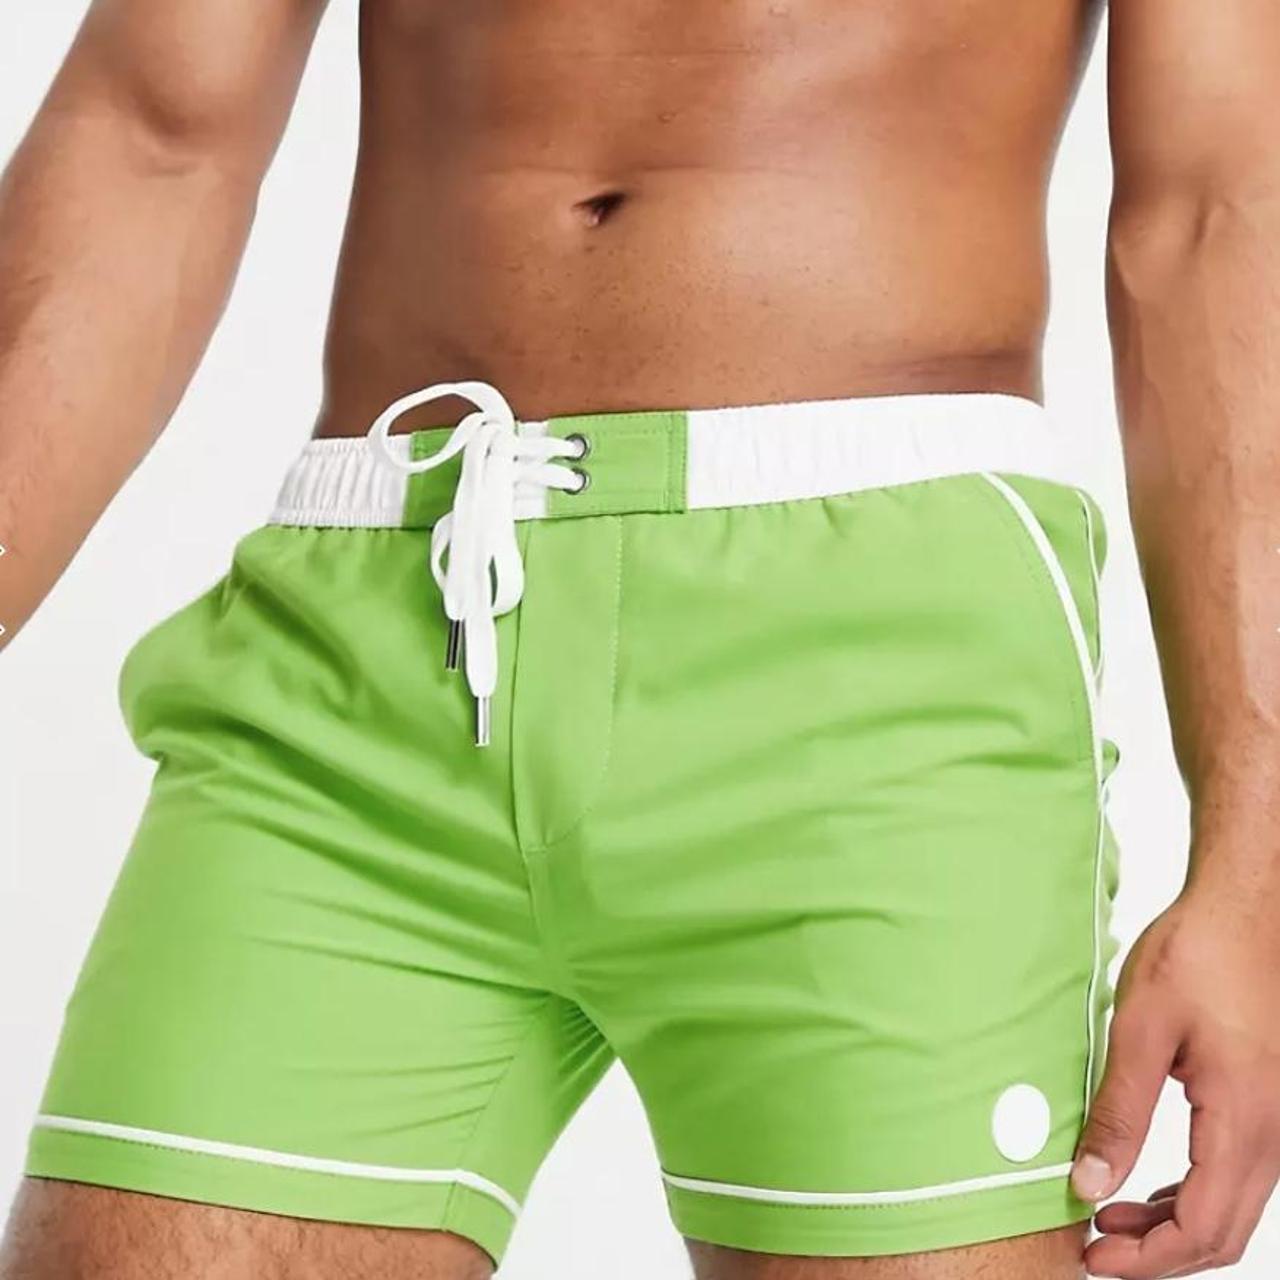 Native Youth Men's Green and White Swim-briefs-shorts